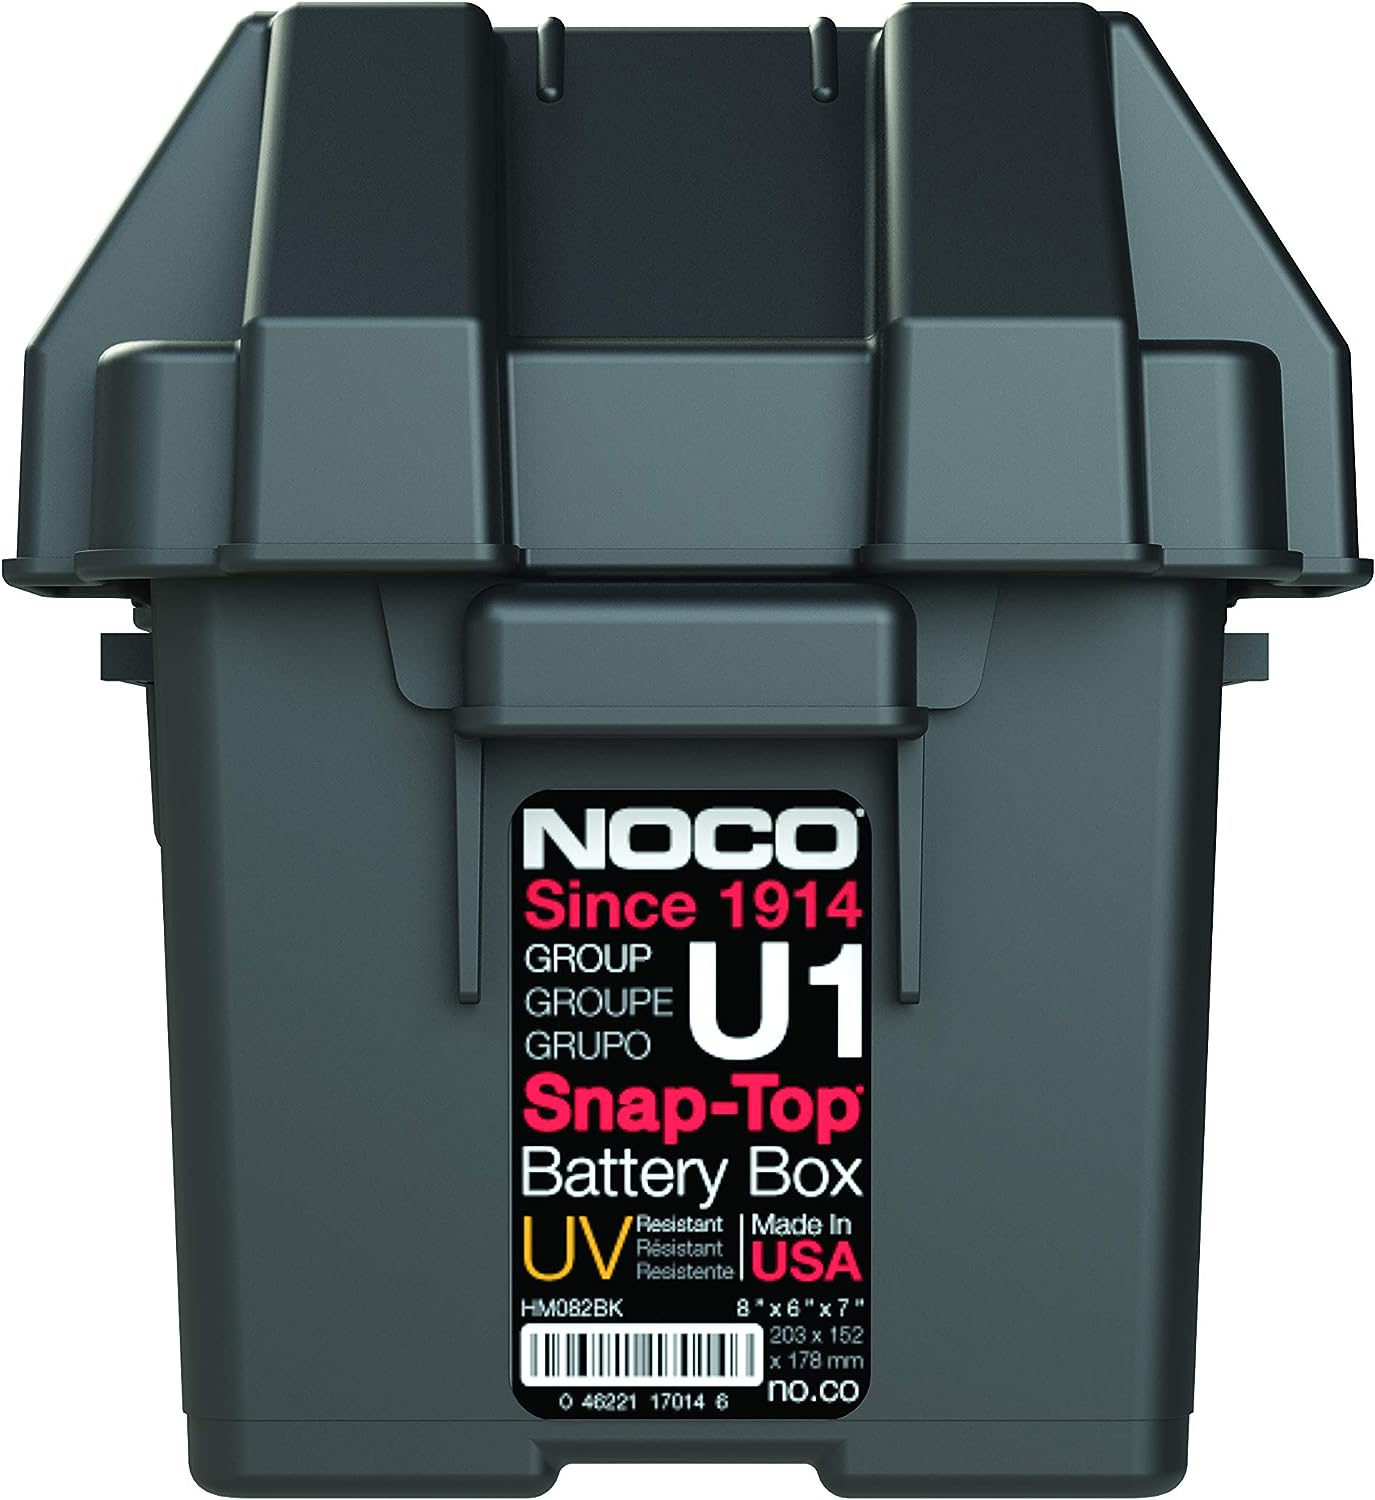 NOCO Snap-Top HM082BKS Battery Box, Group U1 12V Outdoor Waterproof Battery Box for Lawn and Garden, Tractor and Mobility Batteries